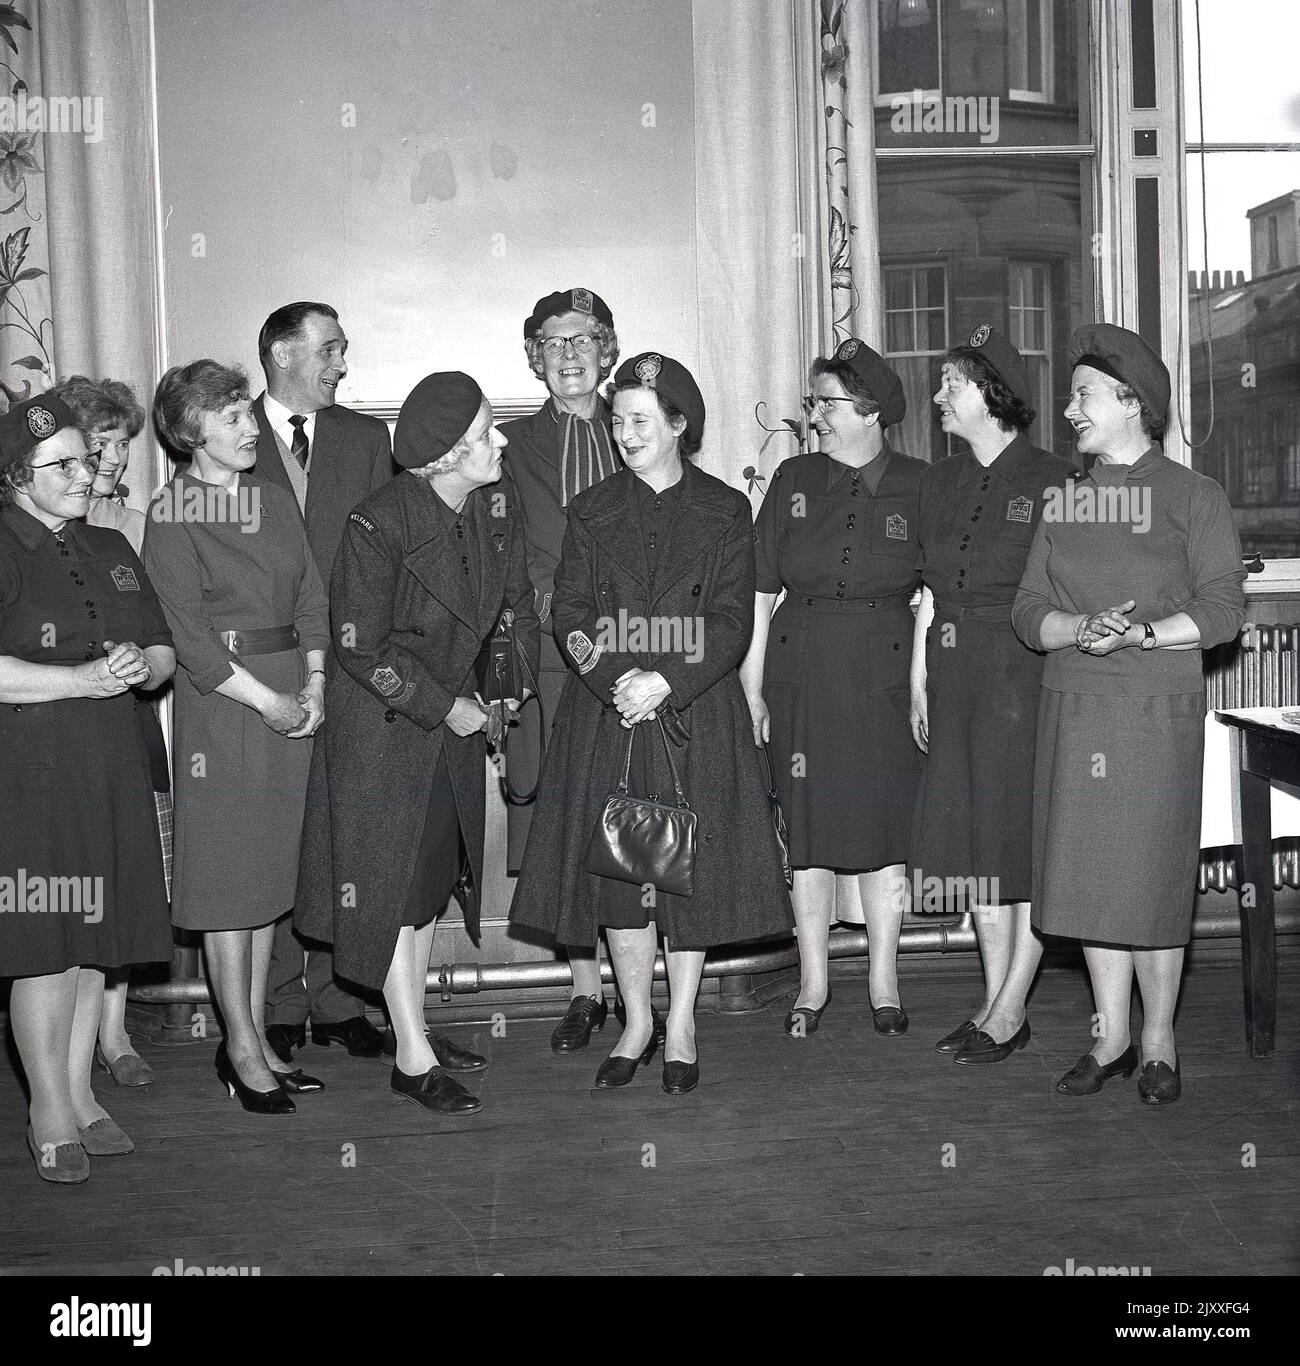 1965, historical, ladies of the WVS, the Women's Voluntary Services, gathered together in a room for a photo at Fife, Scotland, UK, several in their uniform, with emblems on their shirts, saying W.V. S Civil Defence. Now known as The Royal Voluntary Service, it was the Women's Voluntary Services (WVS) from 1938 to 1966 and then the Women's Royal Voluntary Service (WRVS) to 2004, WRVS to 2013. It was founded in 1938, as a British women's organisation to recruit women into the Air Raid Precautions (ARP). The RVS is a voluntary organisation concerned with helping people in need throughout the UK. Stock Photo